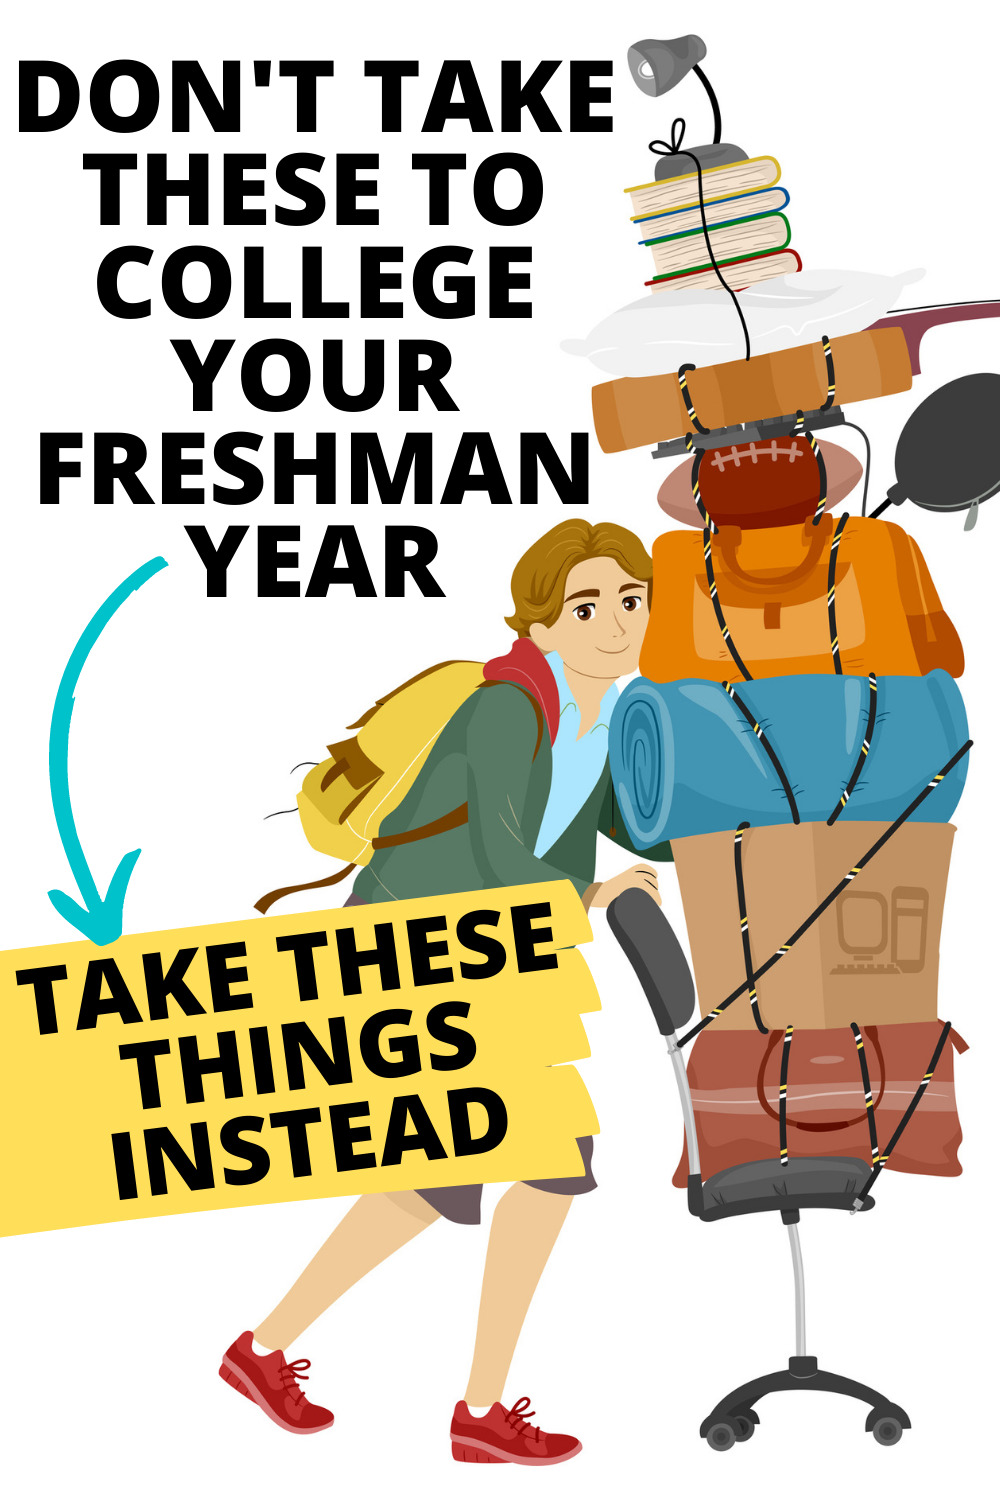 What NOT to bring to college dorm rooms (what do you need for a dorm room?) : cartoon drawing college freshman guy with packed items stacked up a desk chair